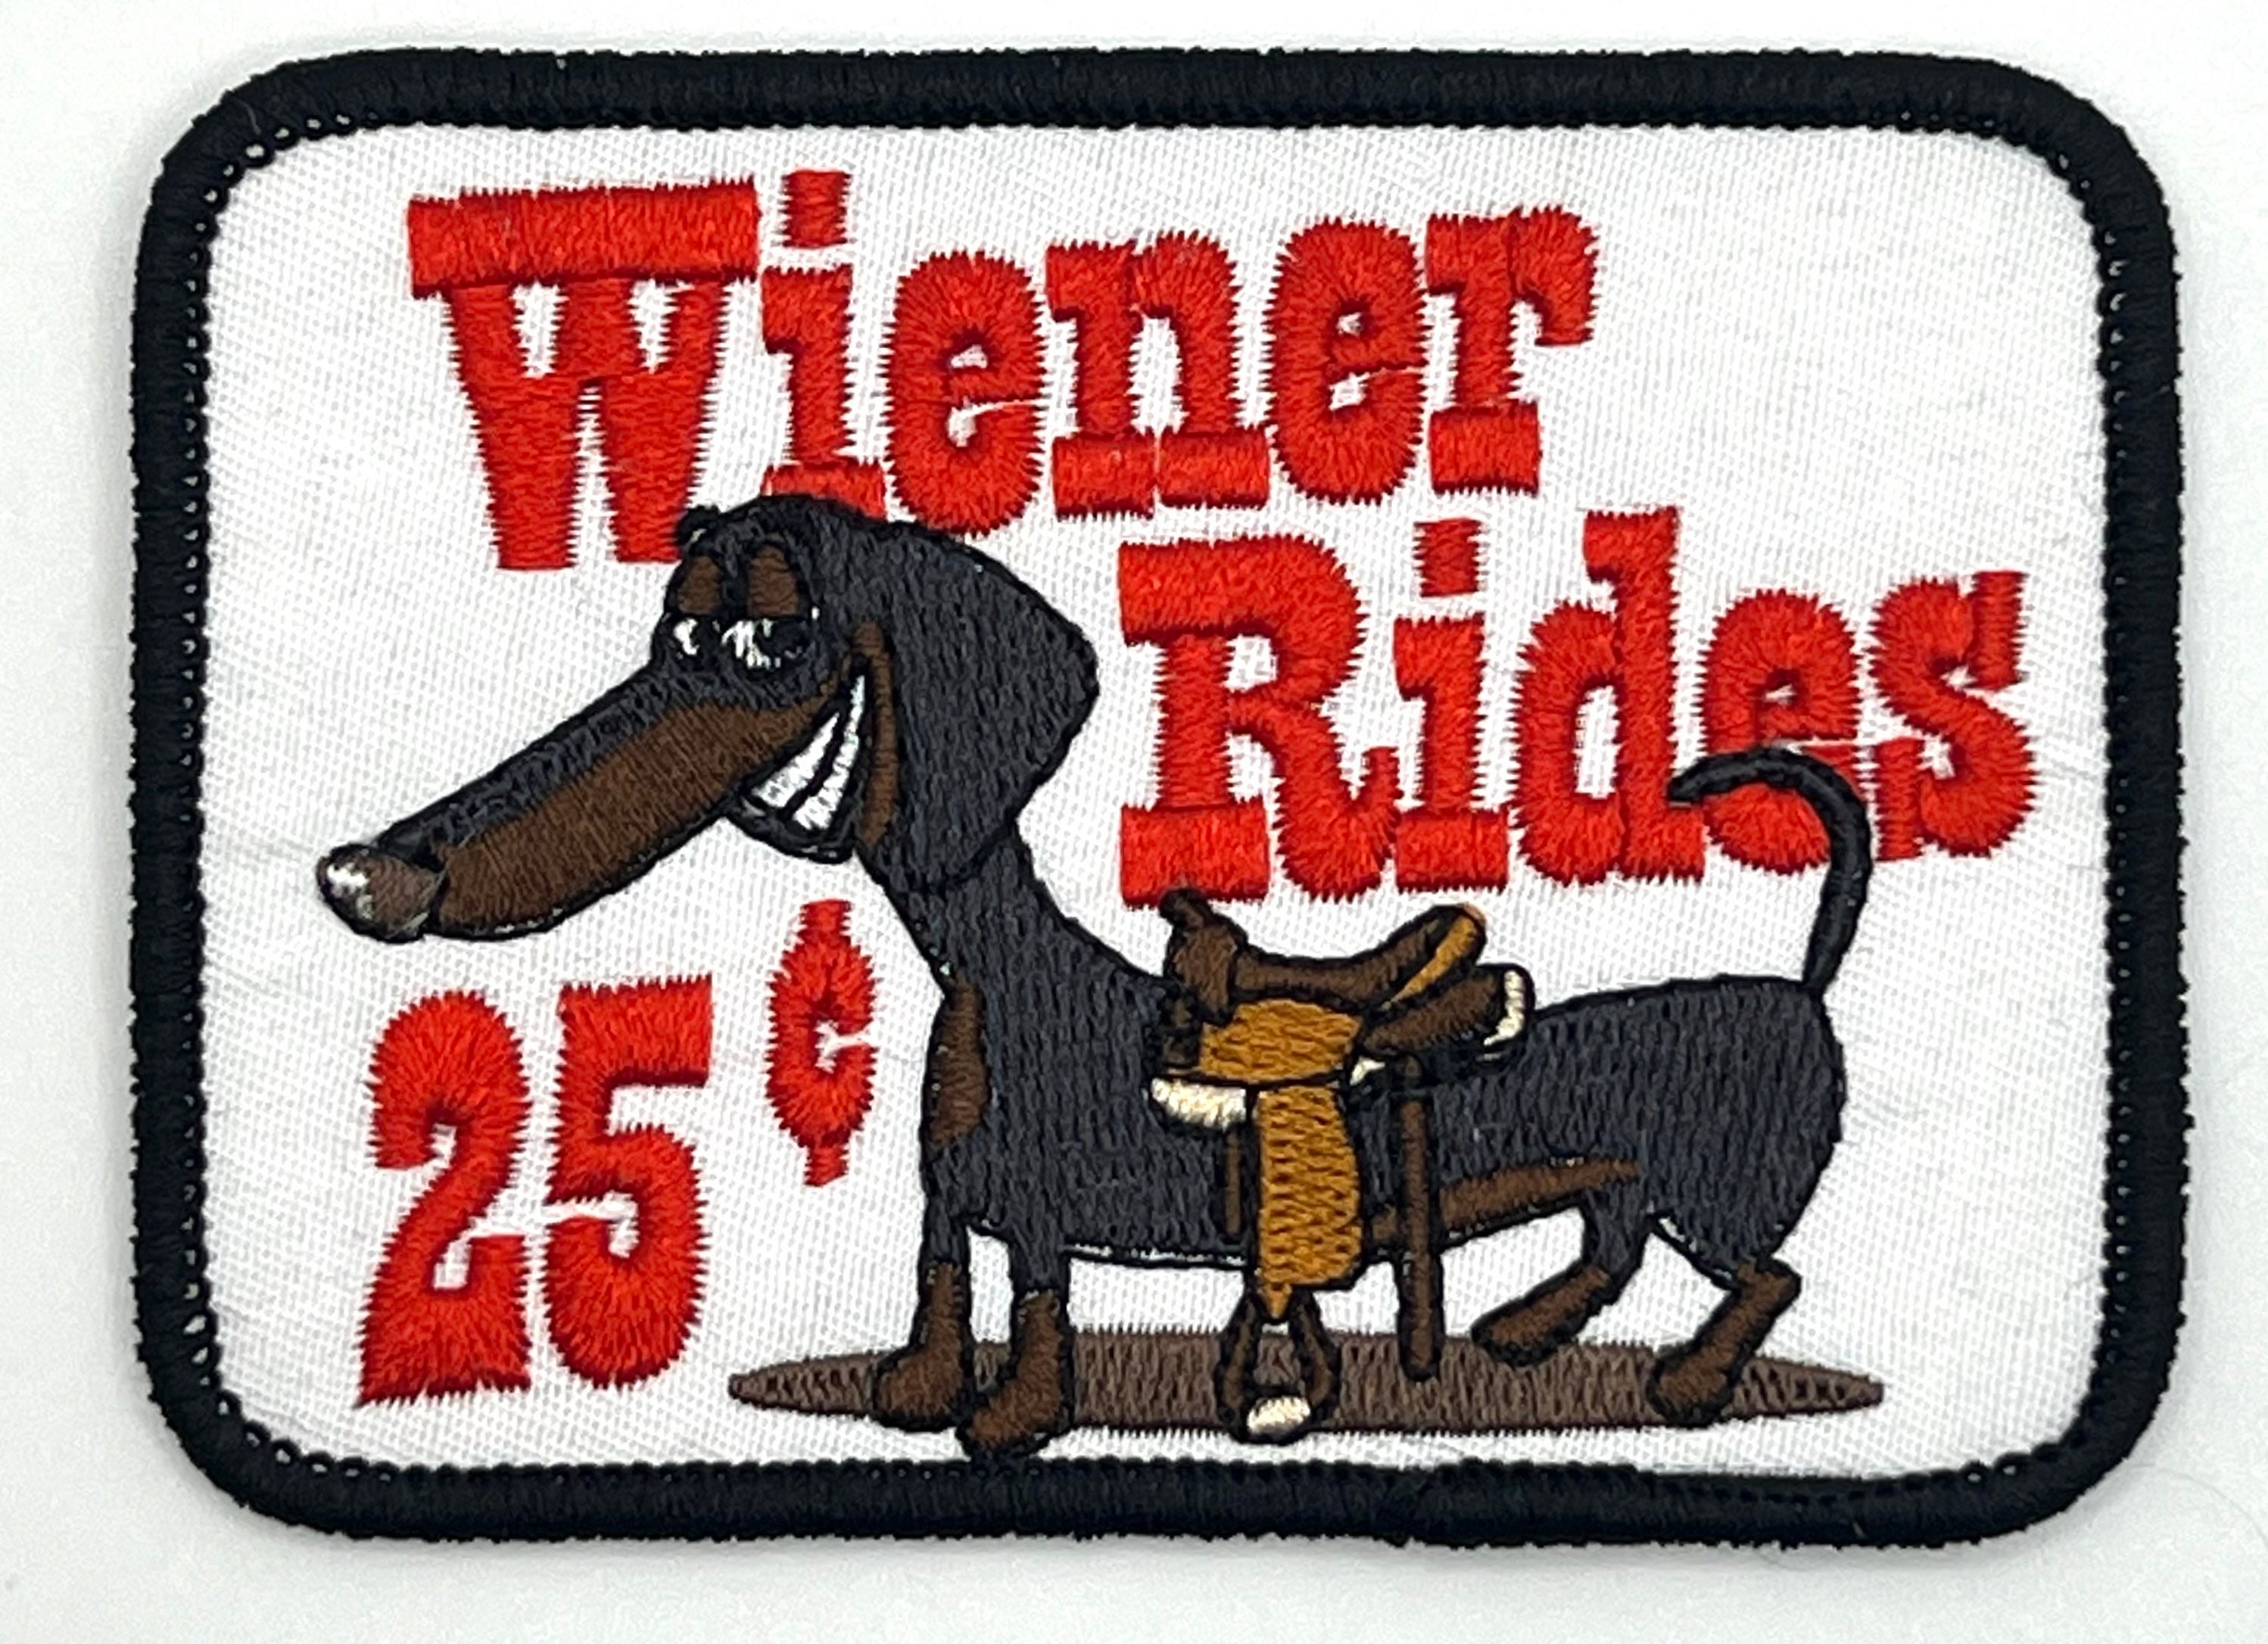 Wiener Rides 25 Cents Humorous Dog Funny Vintage Style Patch pic